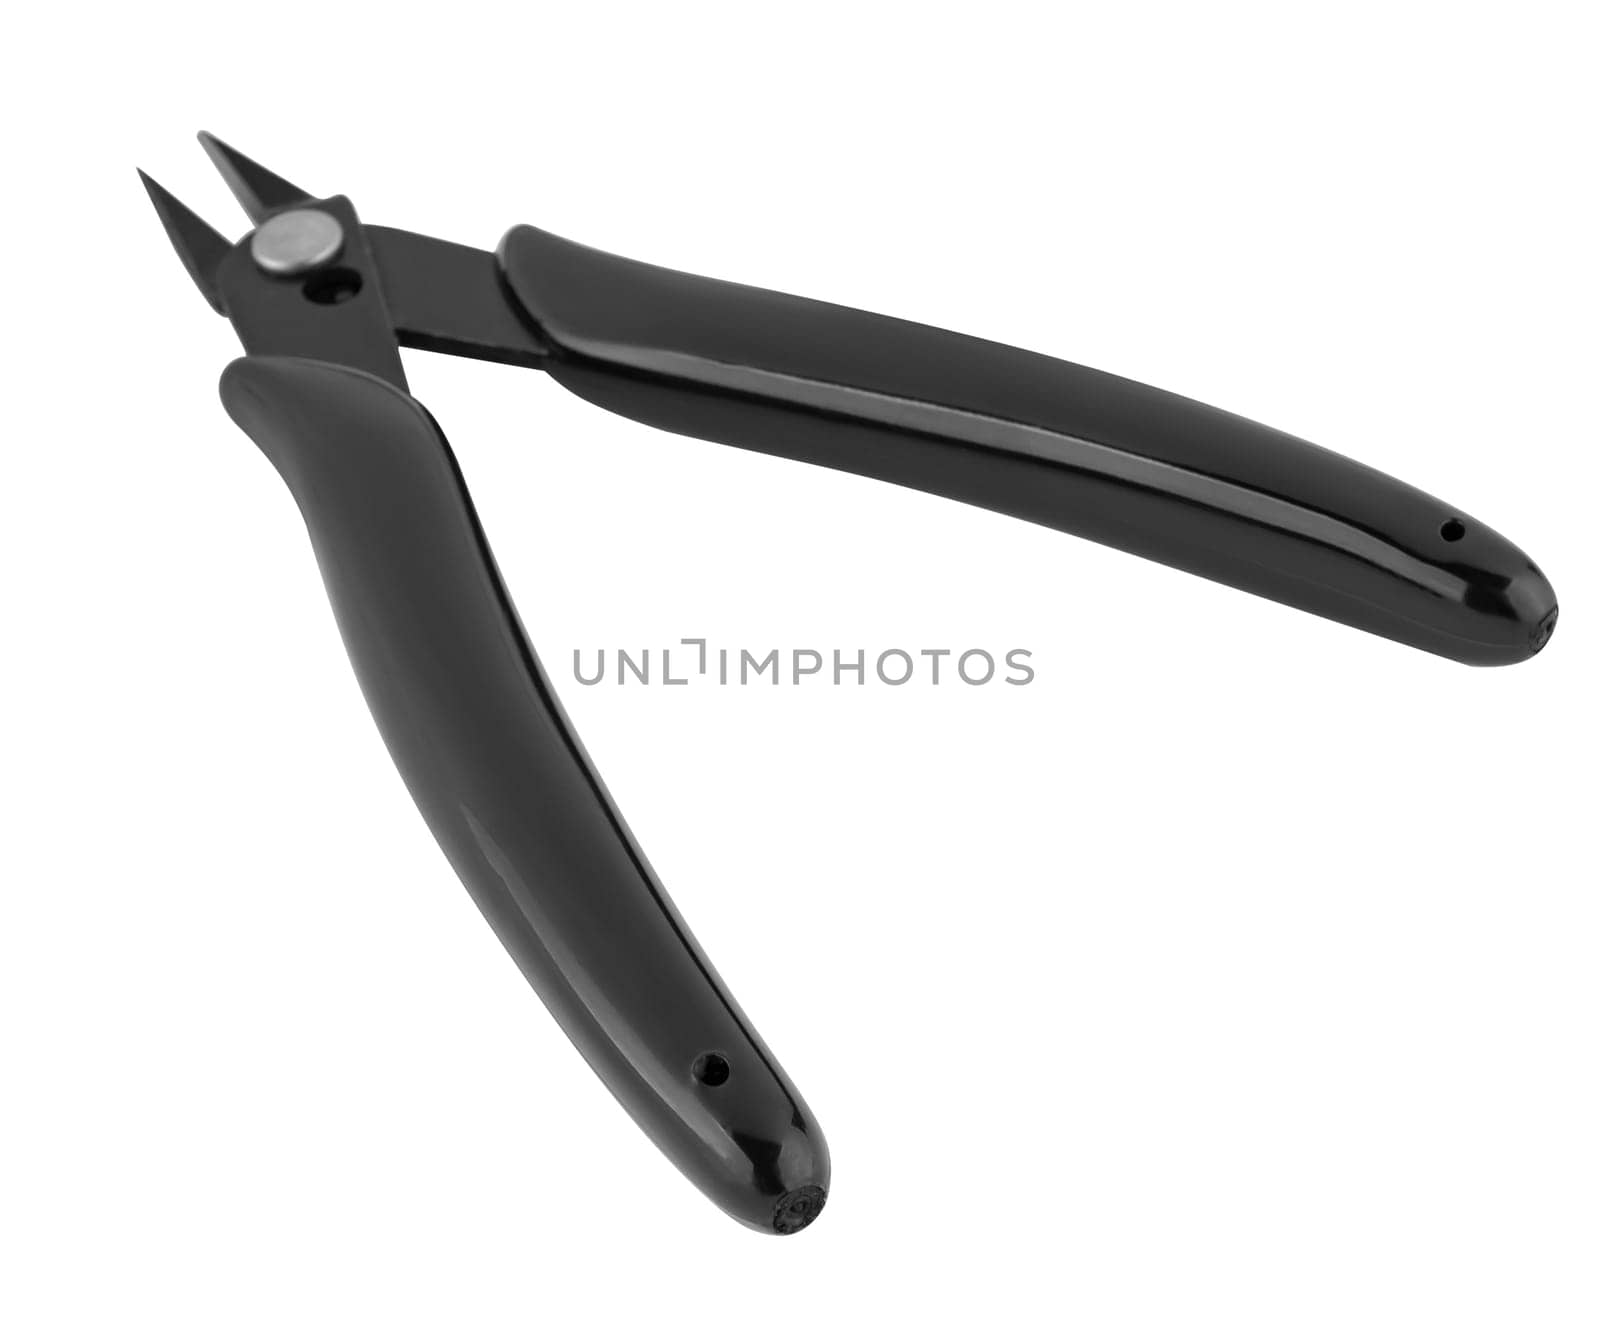 Wire cutting wire cutters, on white background by A_A